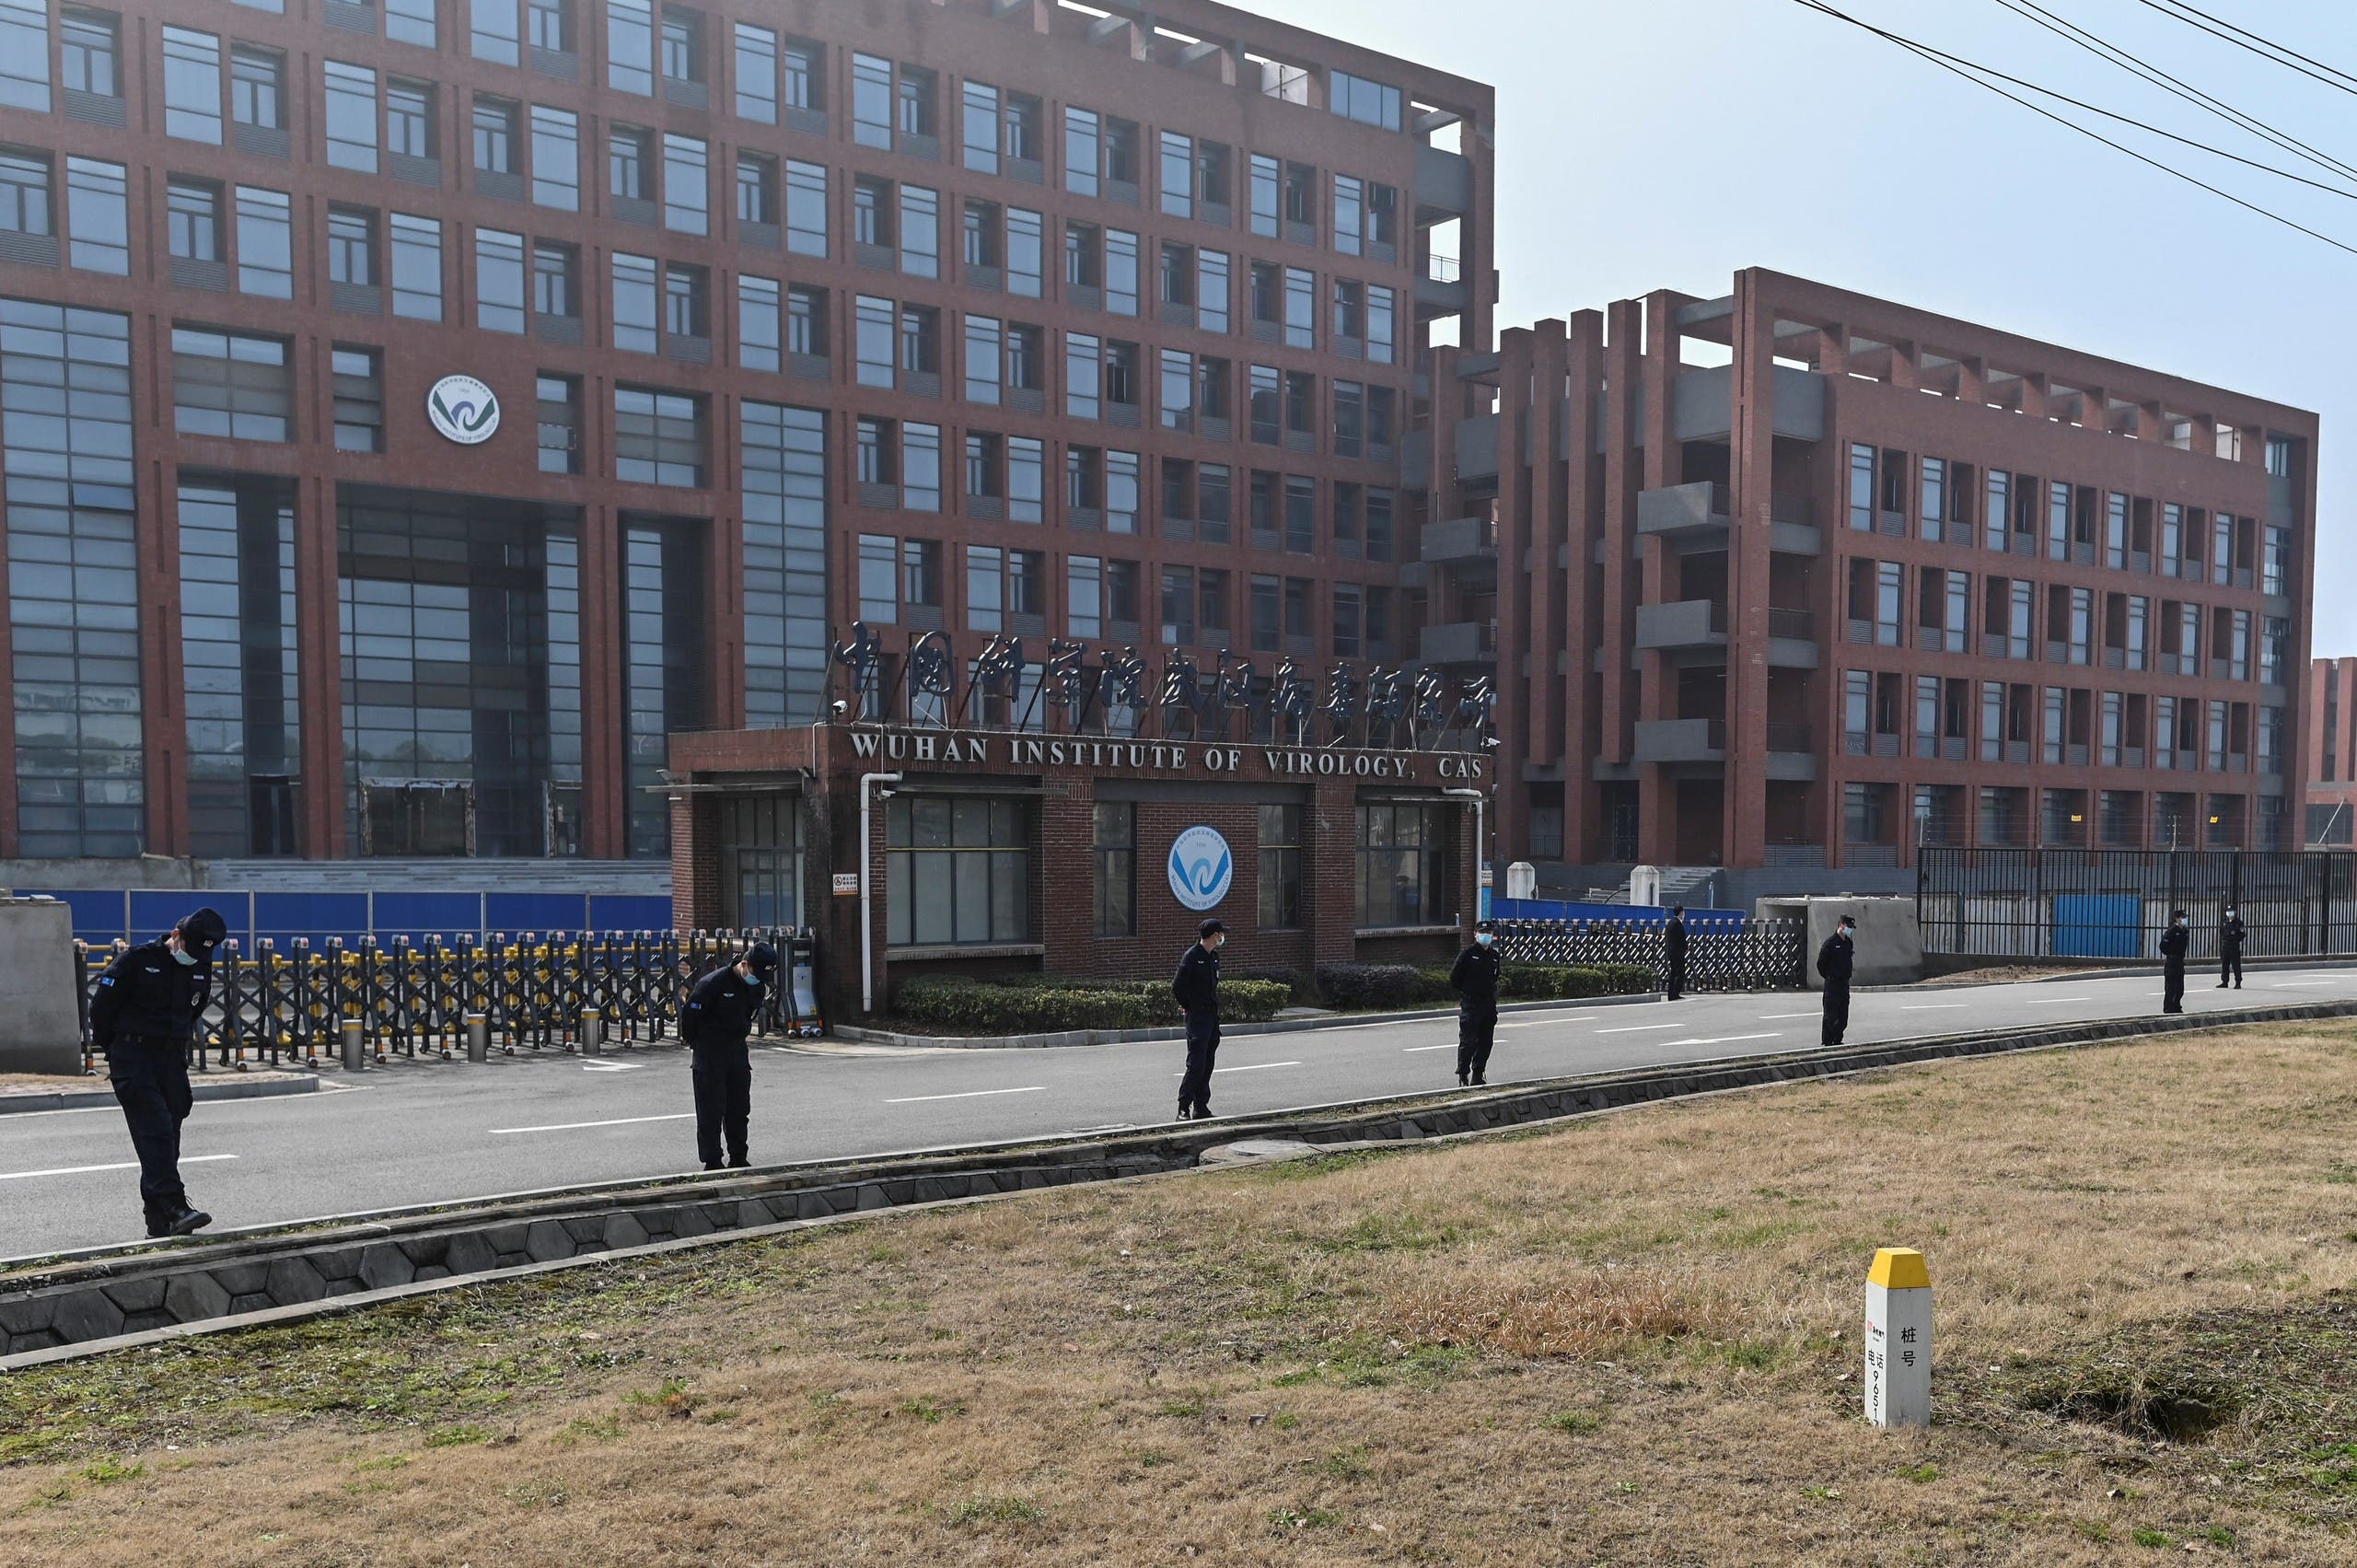 This general view shows the Wuhan Institute of Virology in Wuhan, in China's central Hubei province on February 3, 2021, as members of the World Health Organization (WHO) team investigating the origins of the COVID-19 coronavirus, visit. (Stock image)